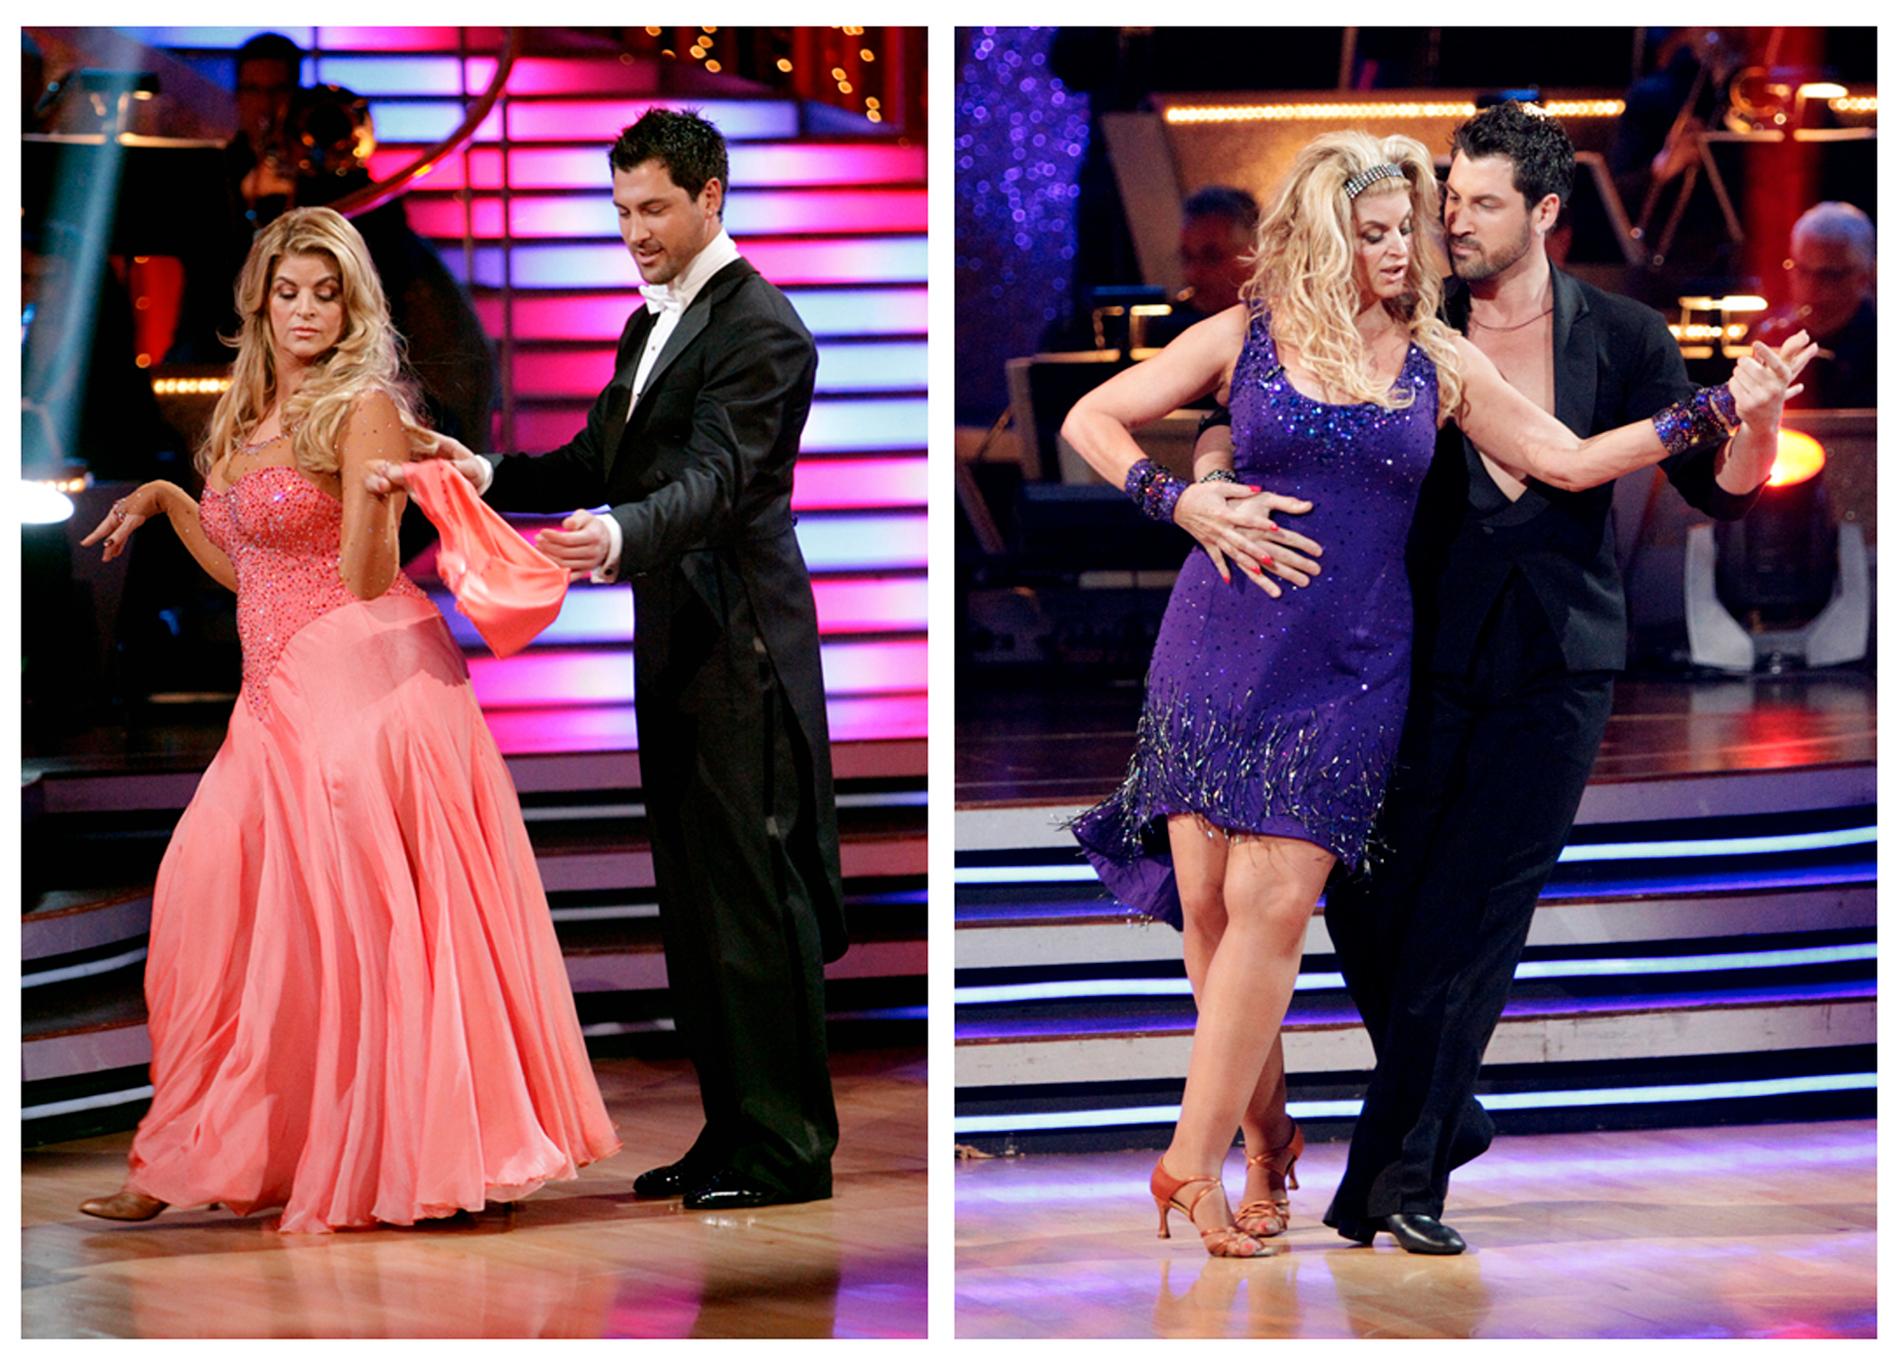 Kirstie Alley i ”Dancing with the stars” 2011.